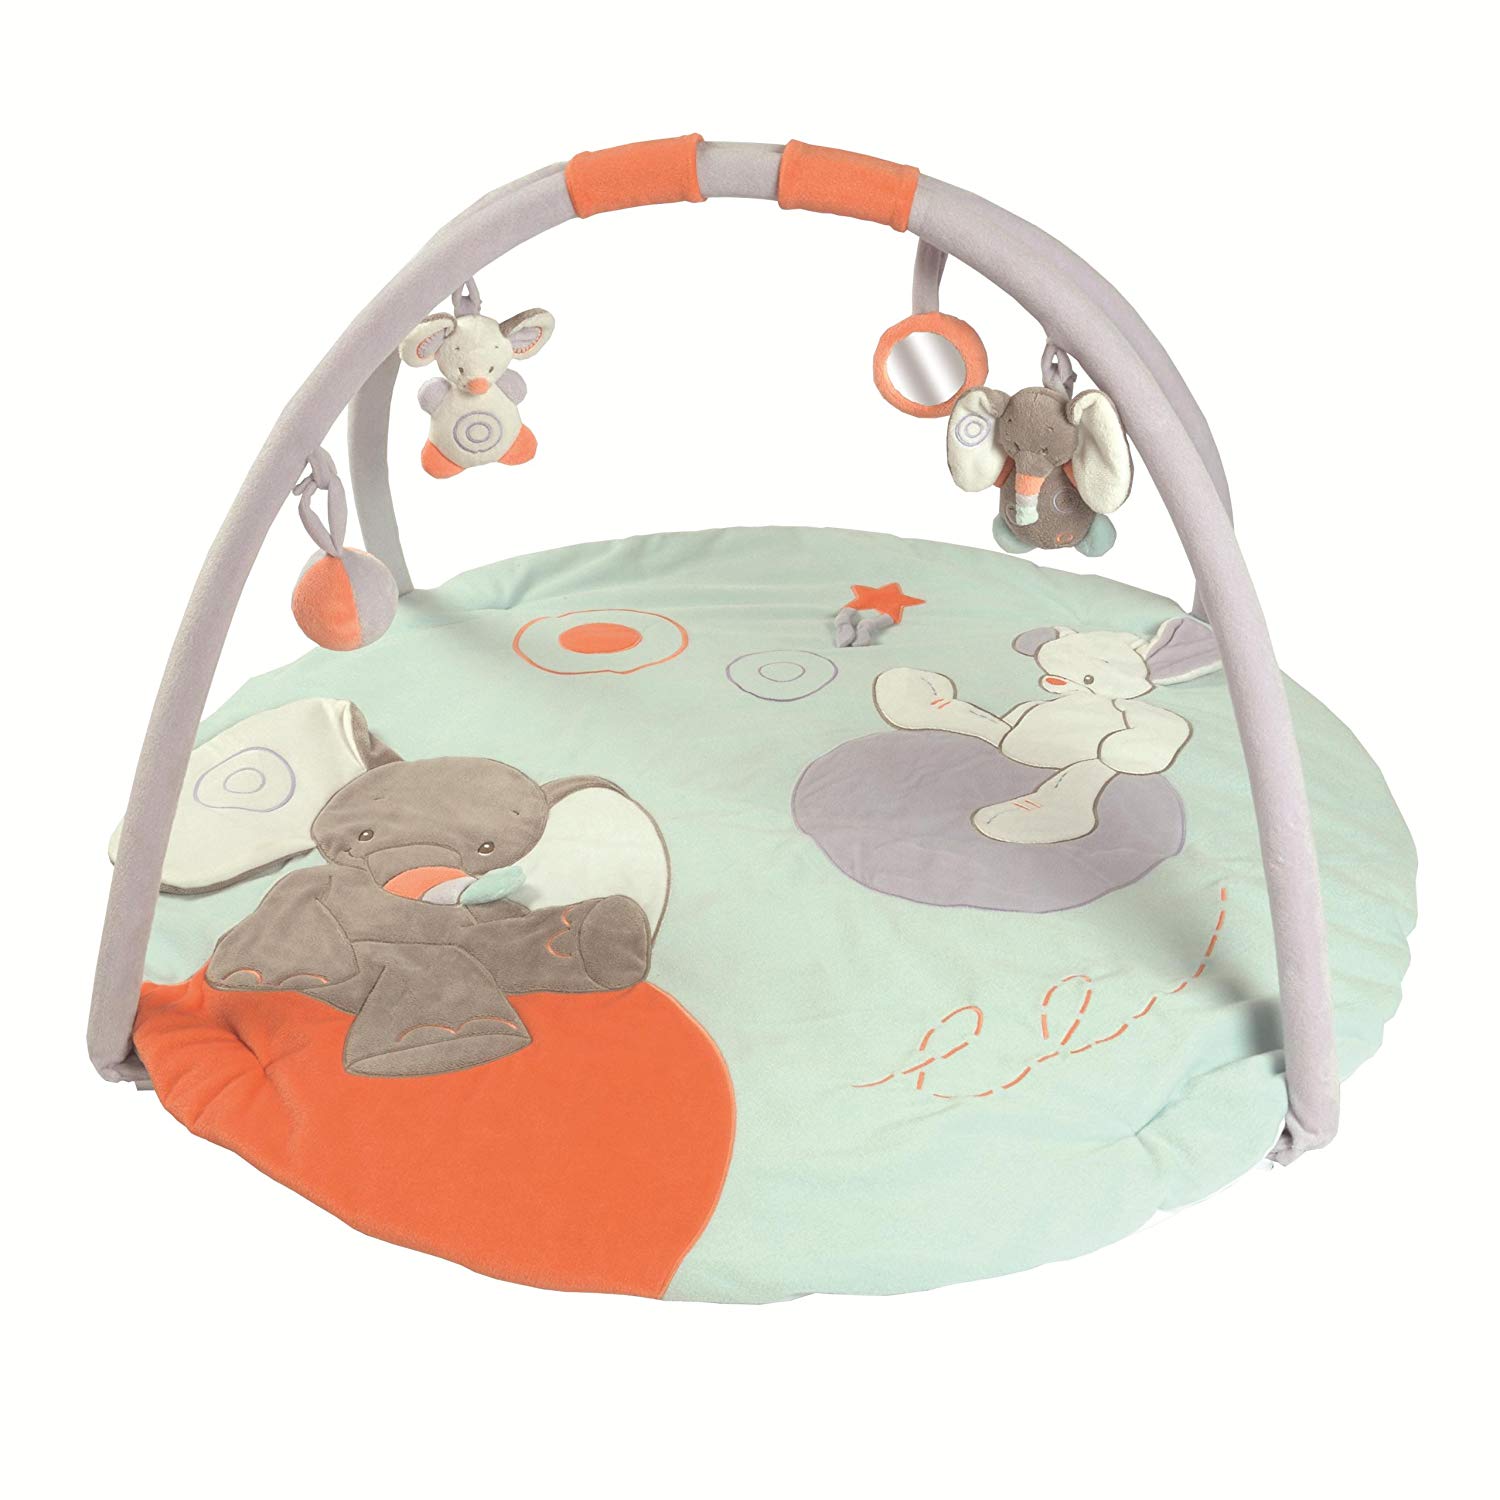 Nattou Bubbles 578295 Play Mat with Bow